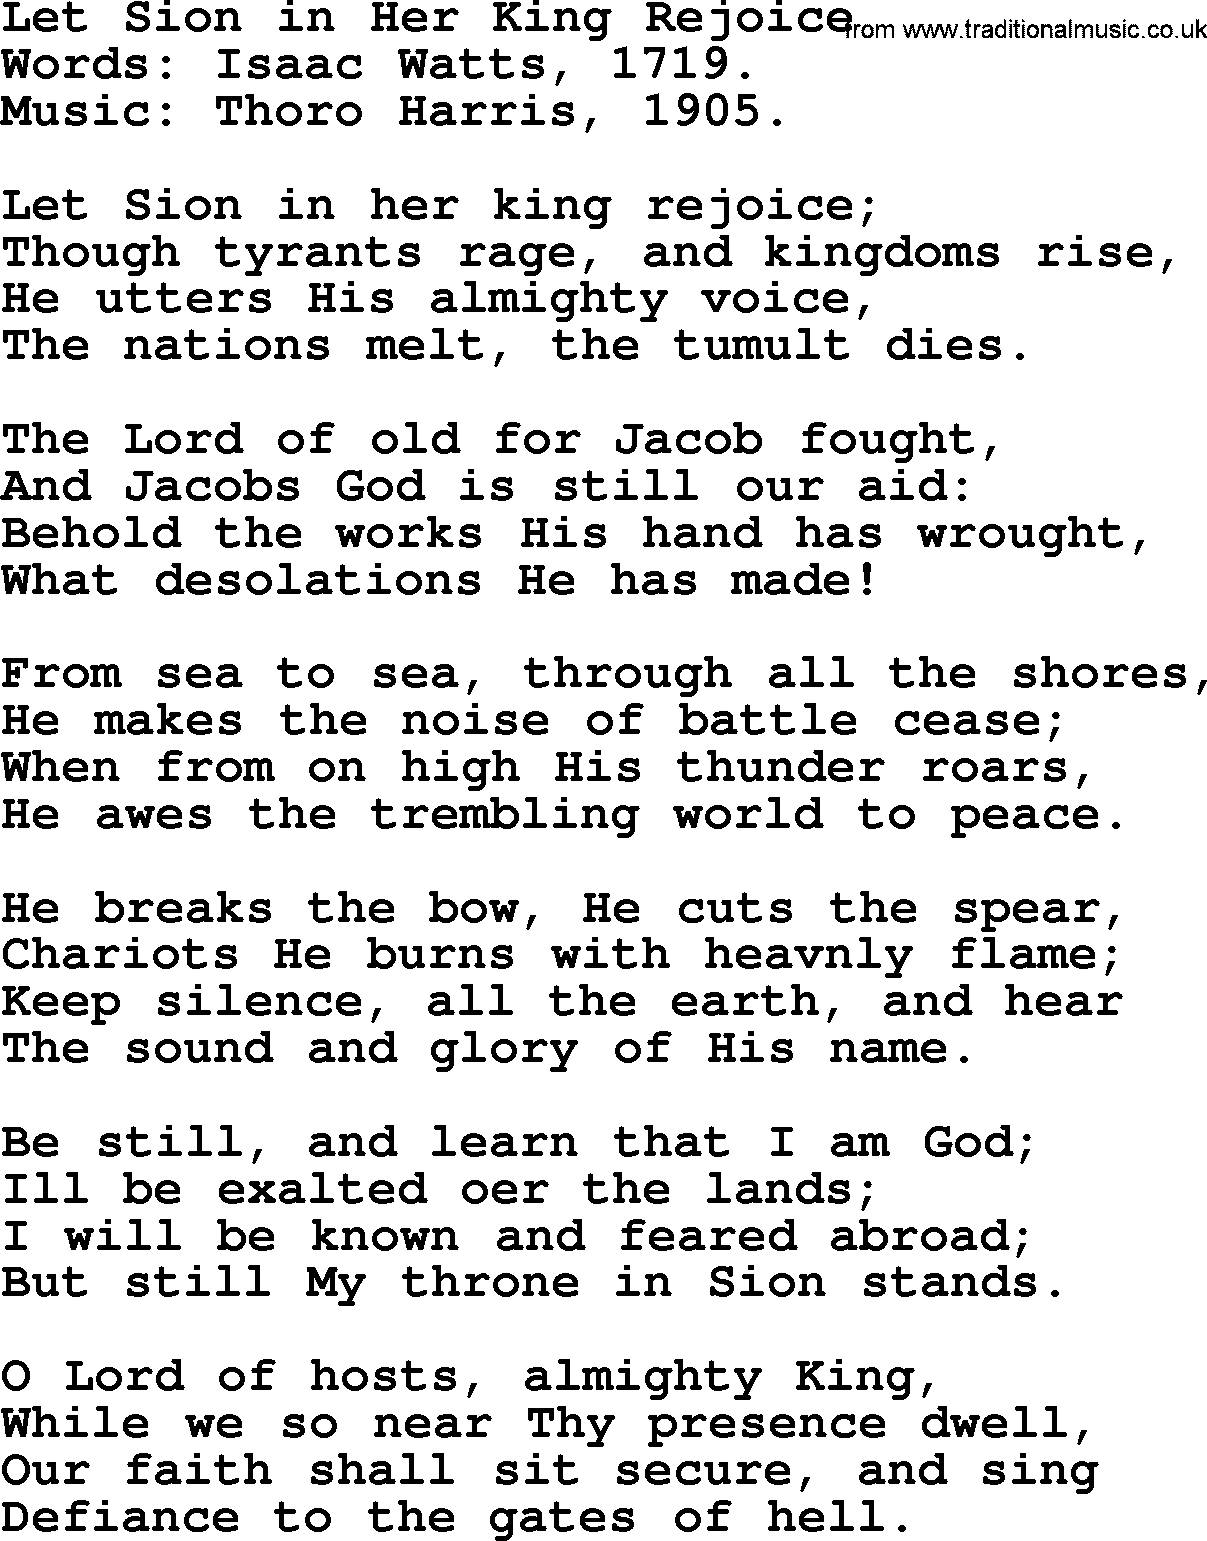 Isaac Watts Christian hymn: Let Sion in Her King Rejoice- lyricss